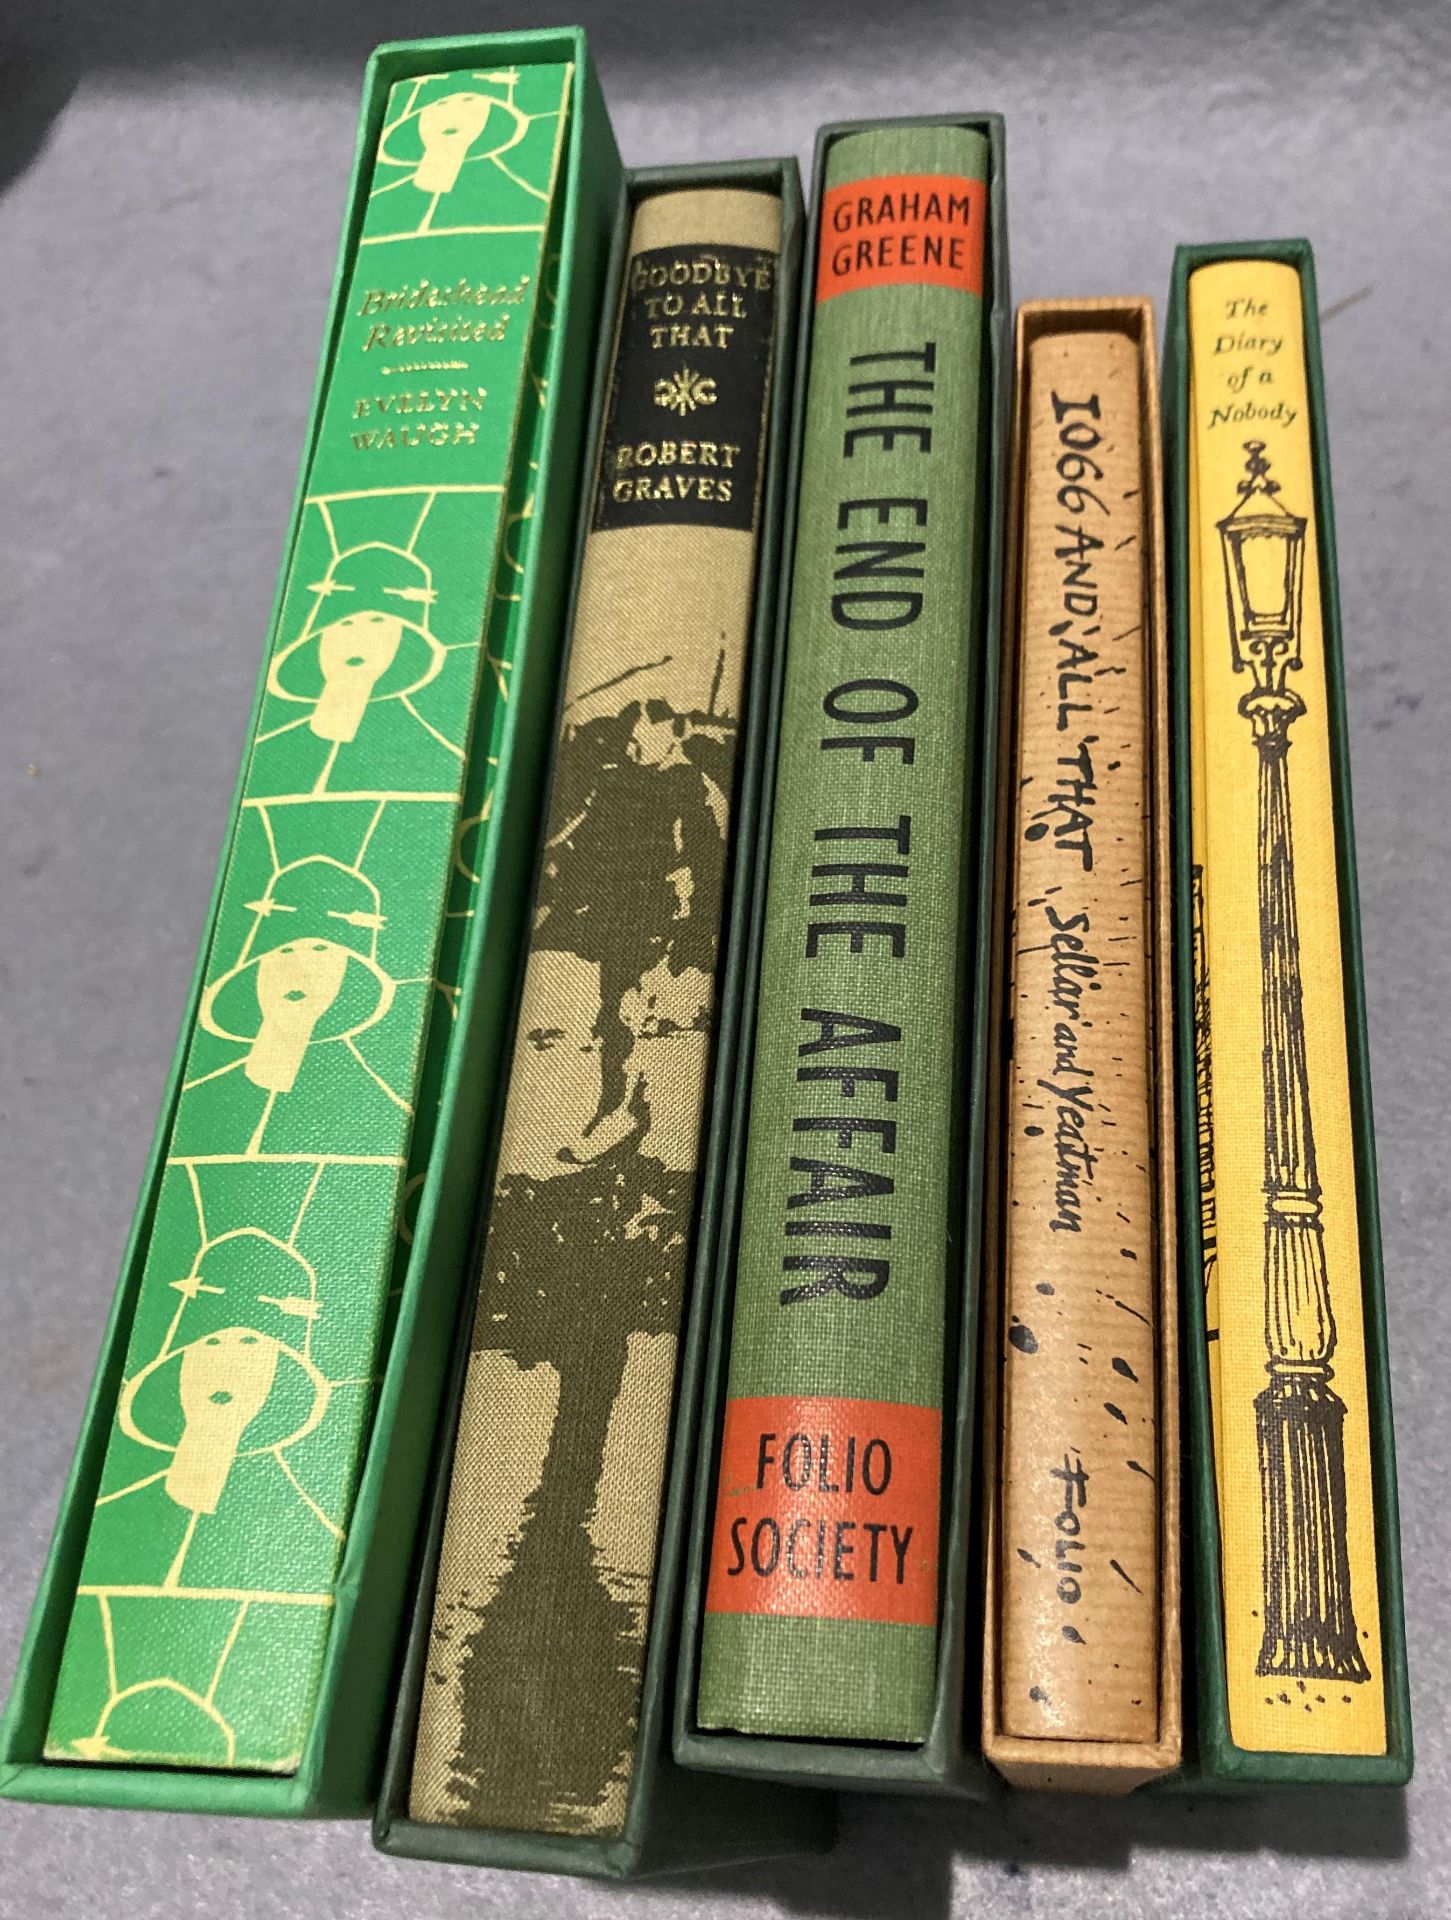 Folio Society - five books in covers - Robert Graves 'Goodbye to All That',